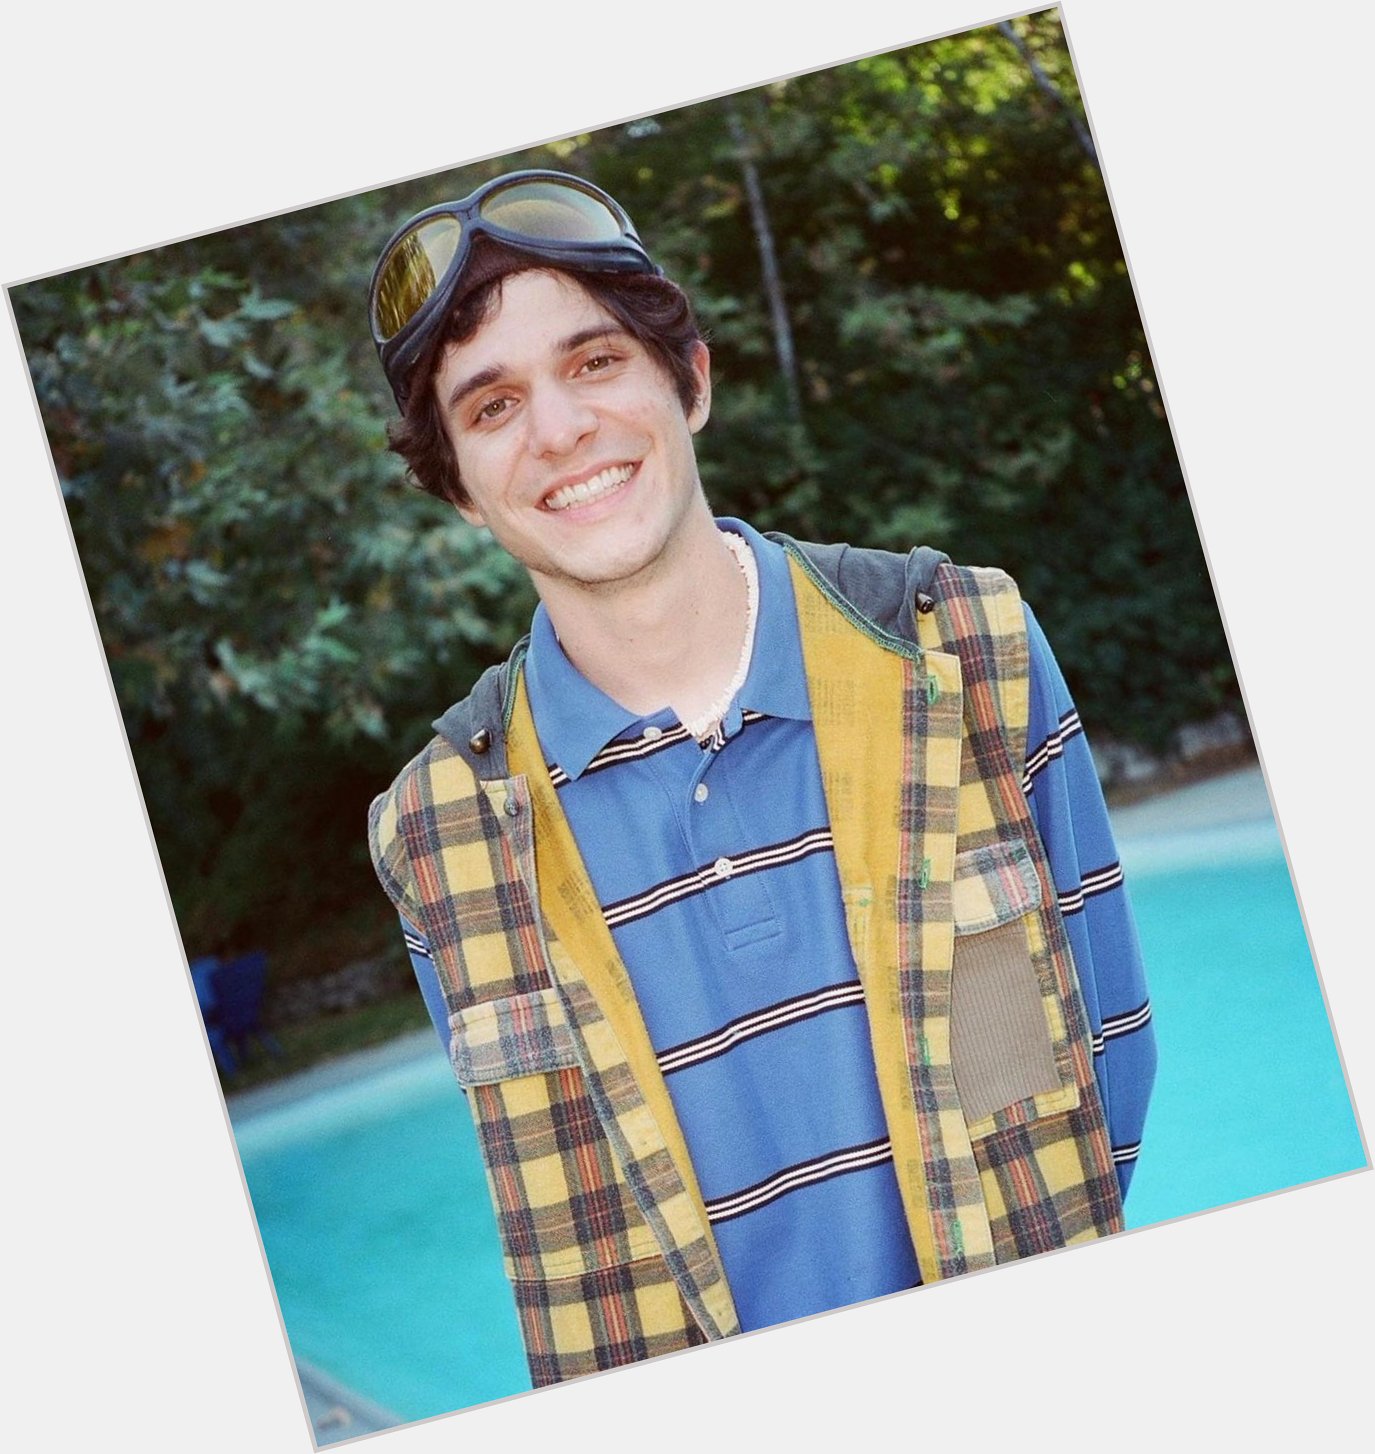 Happy birthday braeden lemasters. keep your beautiful smile, it means a lot to us 